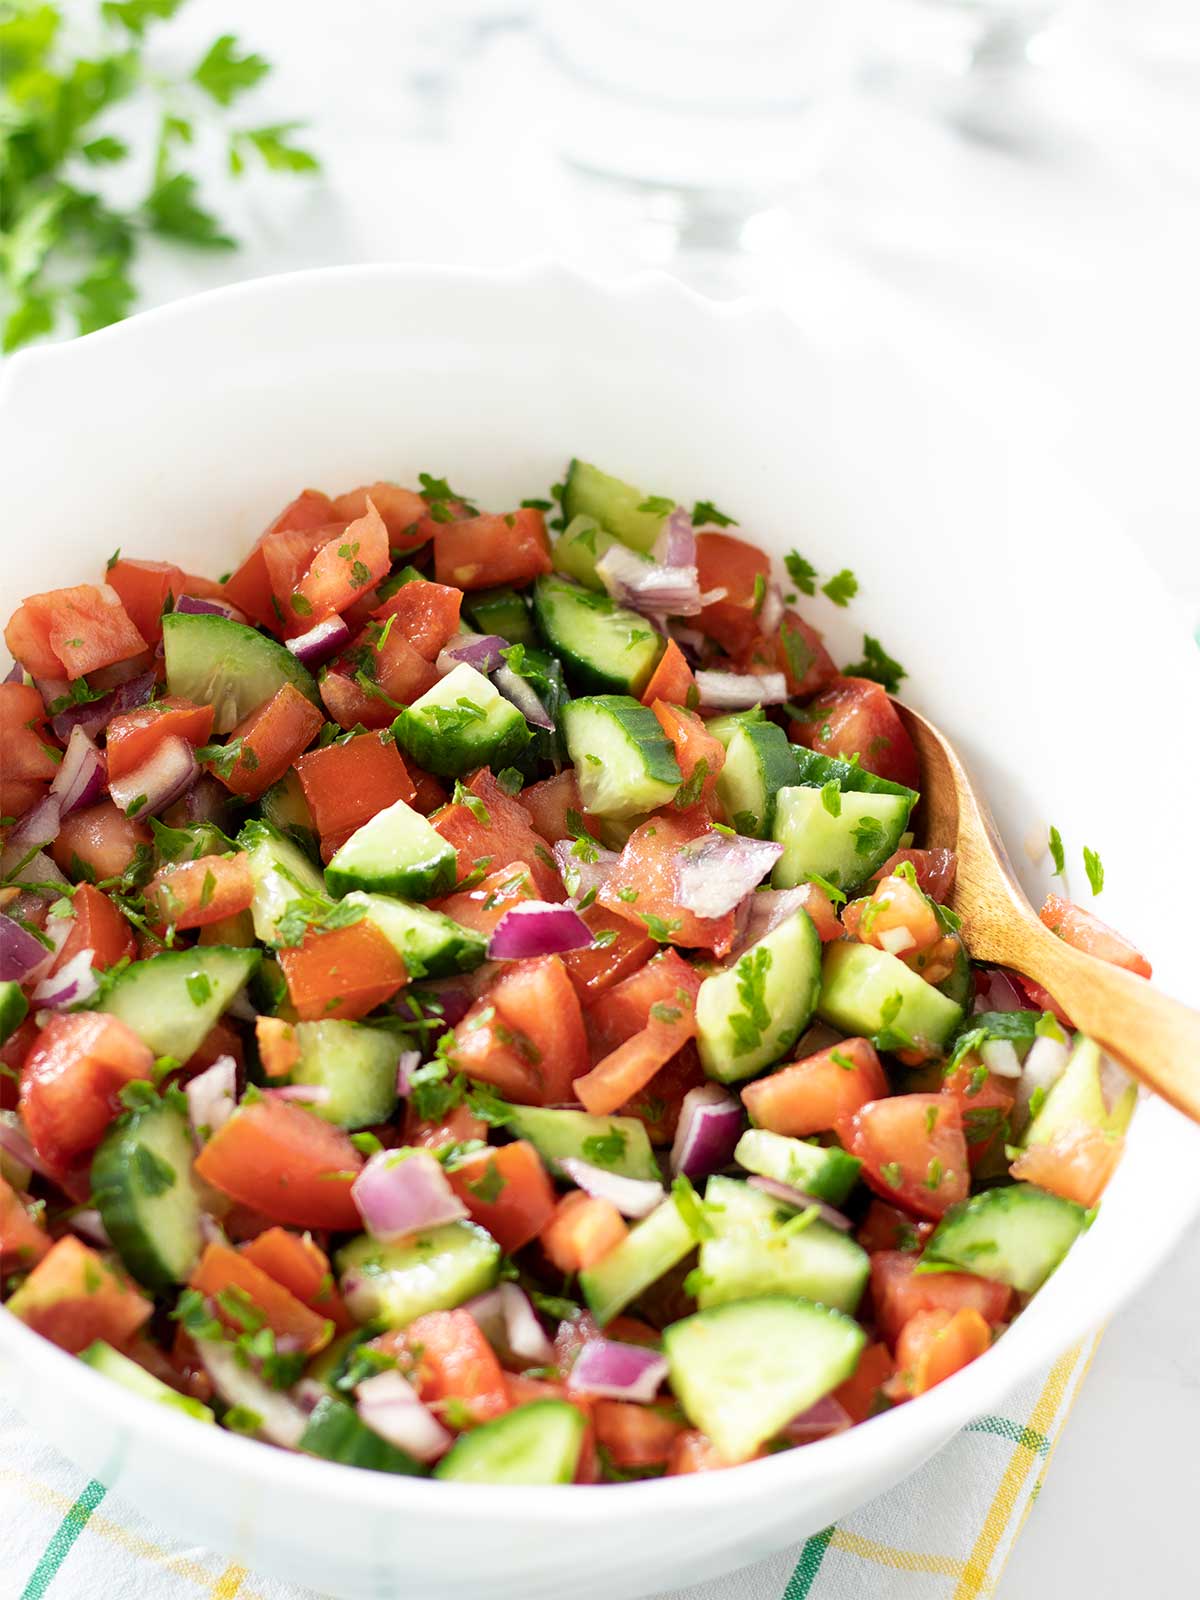 Low-calorie Mediterranean summer salad with cucumbers, tomatoes, red onion, and fresh parsley.